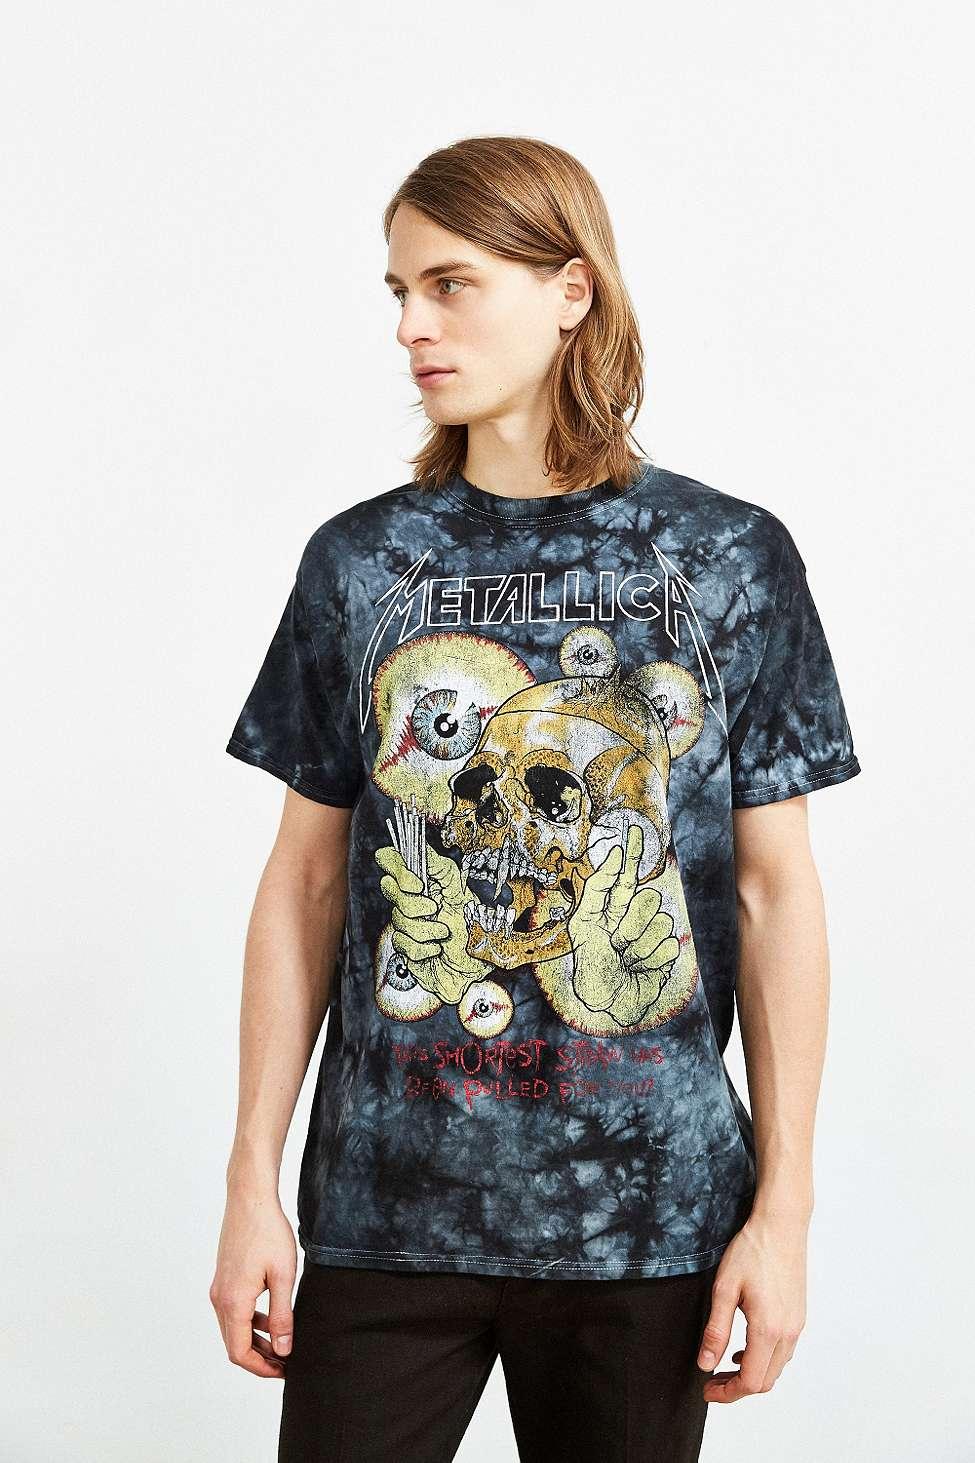 Times nordstrom rock band tees urban outfitters 2017 annual kenya zippay